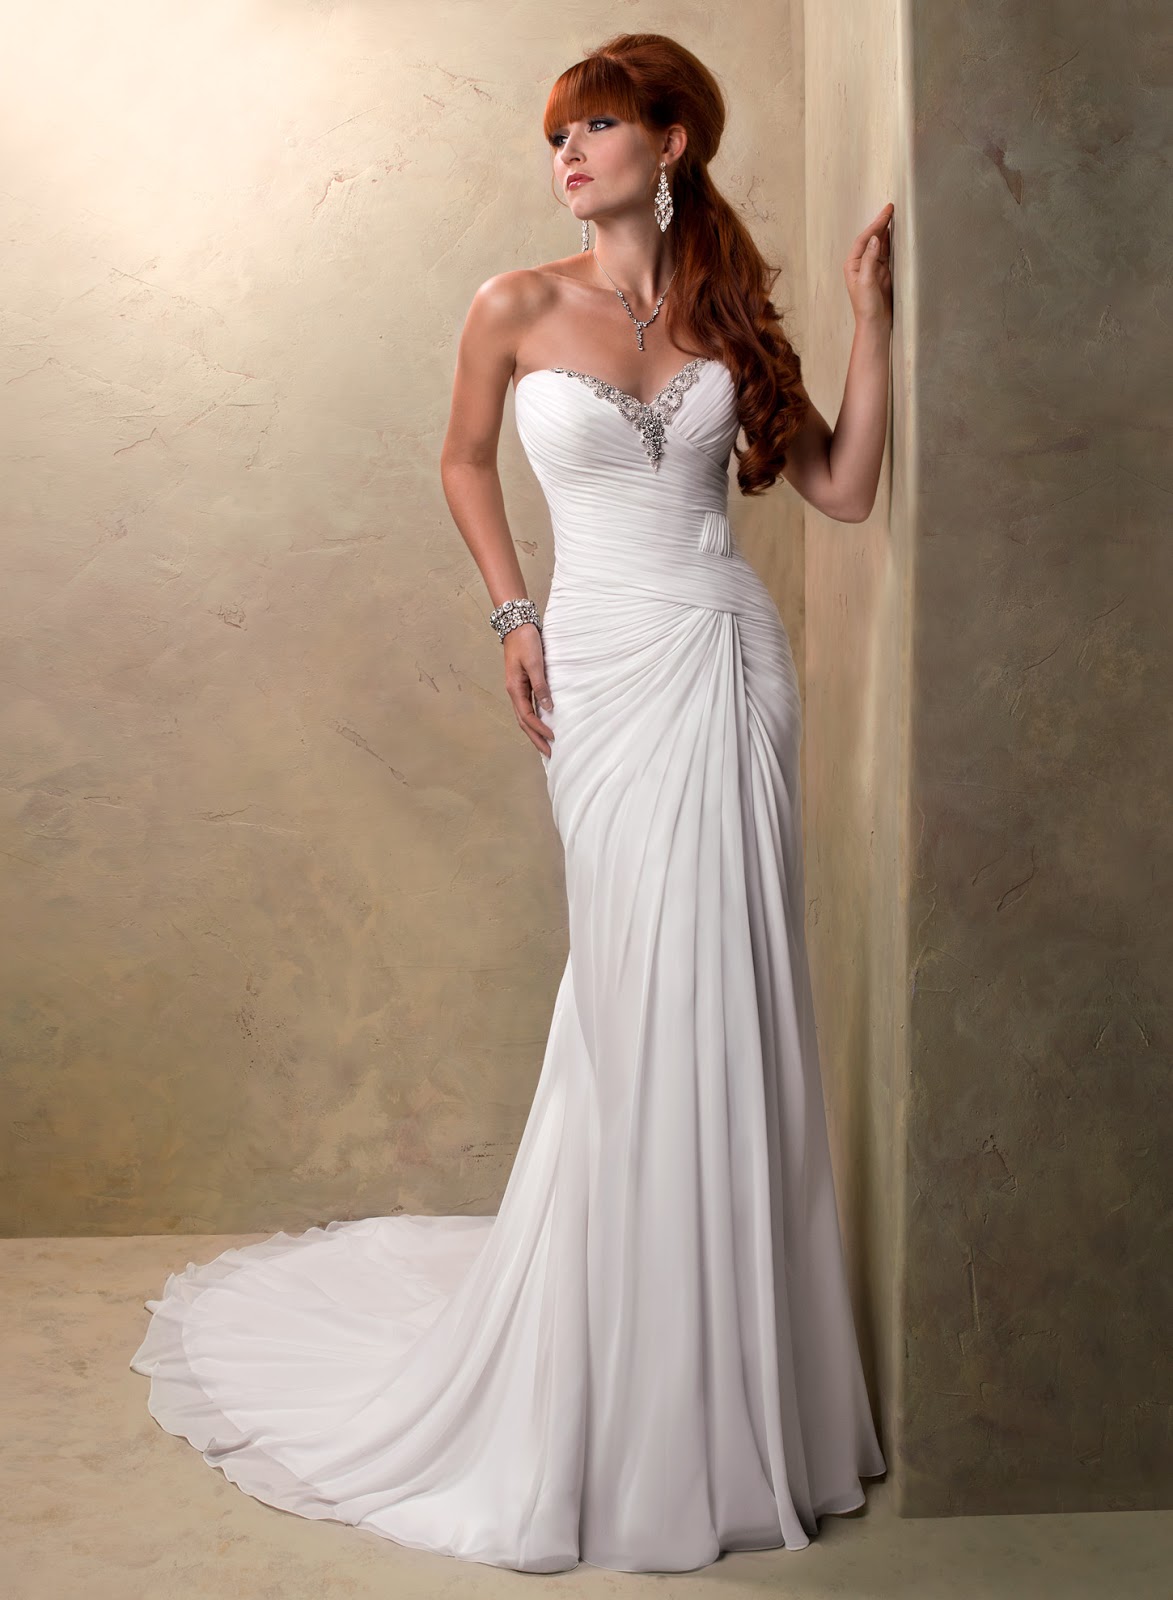 Mia's Bridal & Tailoring: New Stock from Maggie Sottero